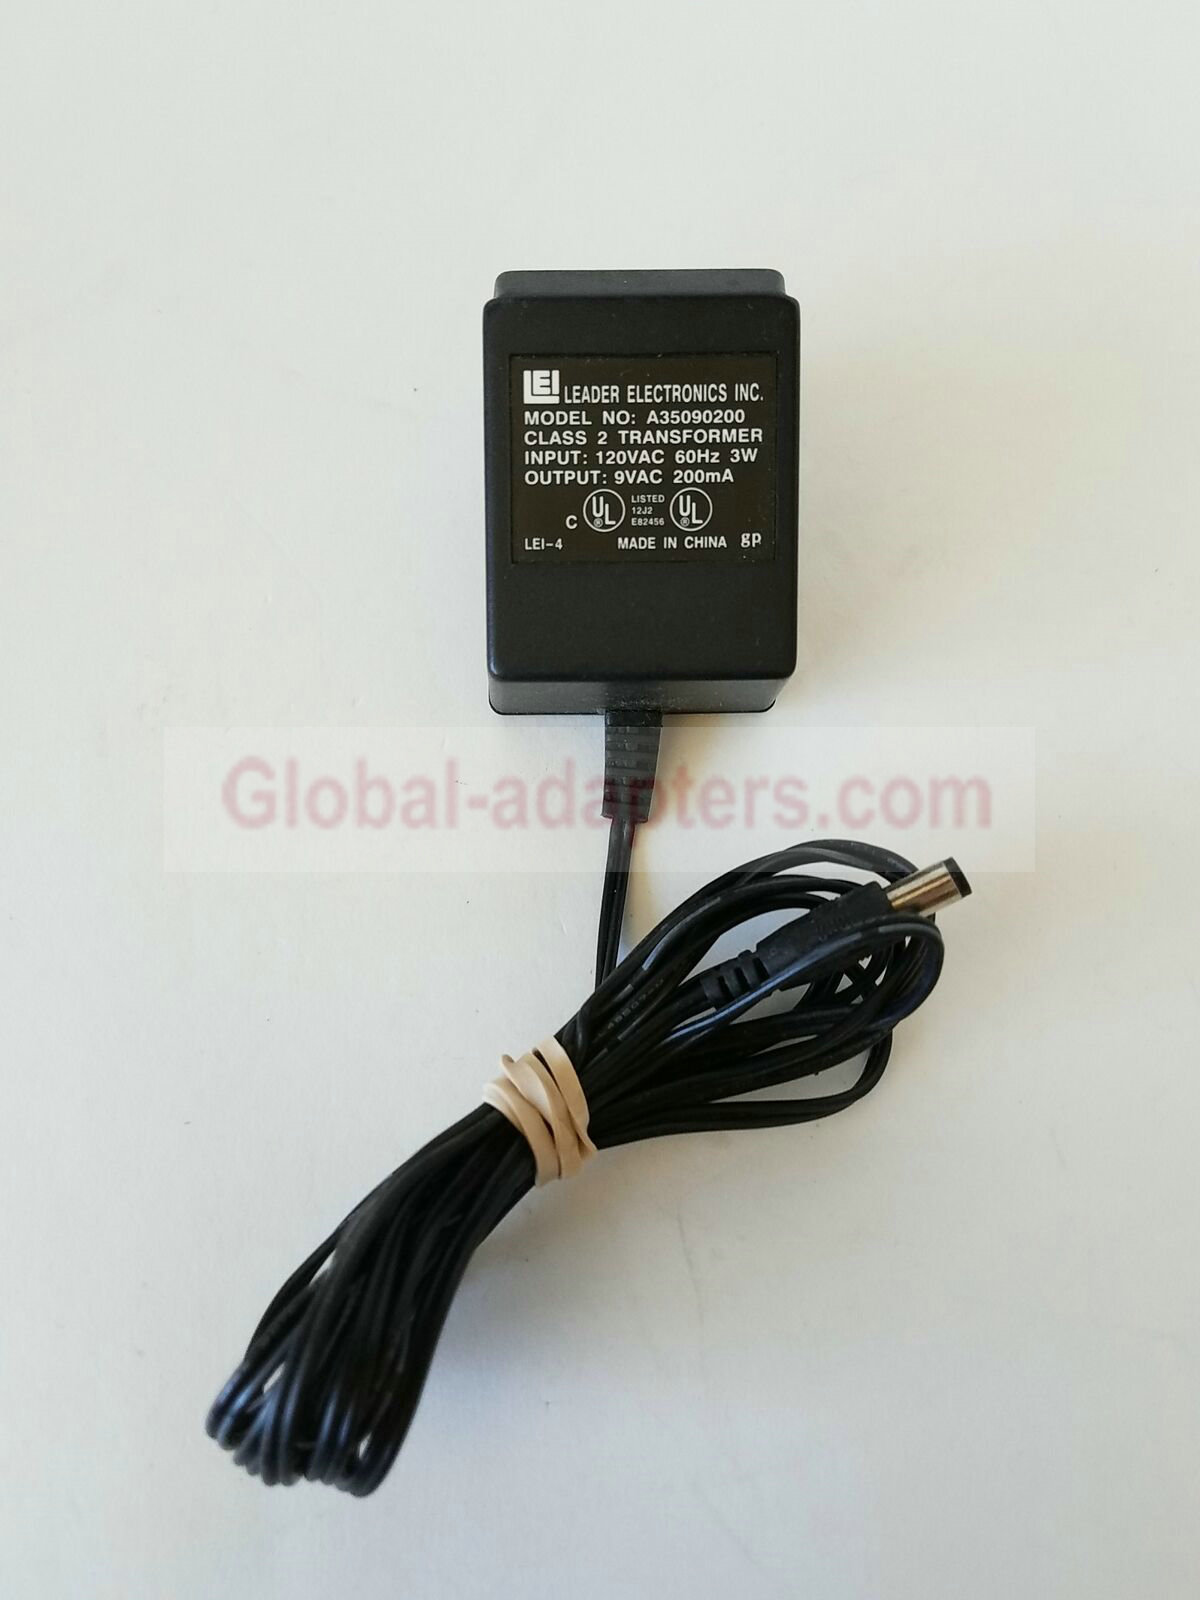 NEW 9V 200mA Leader Electronic LEI A35090200 AC Adapter